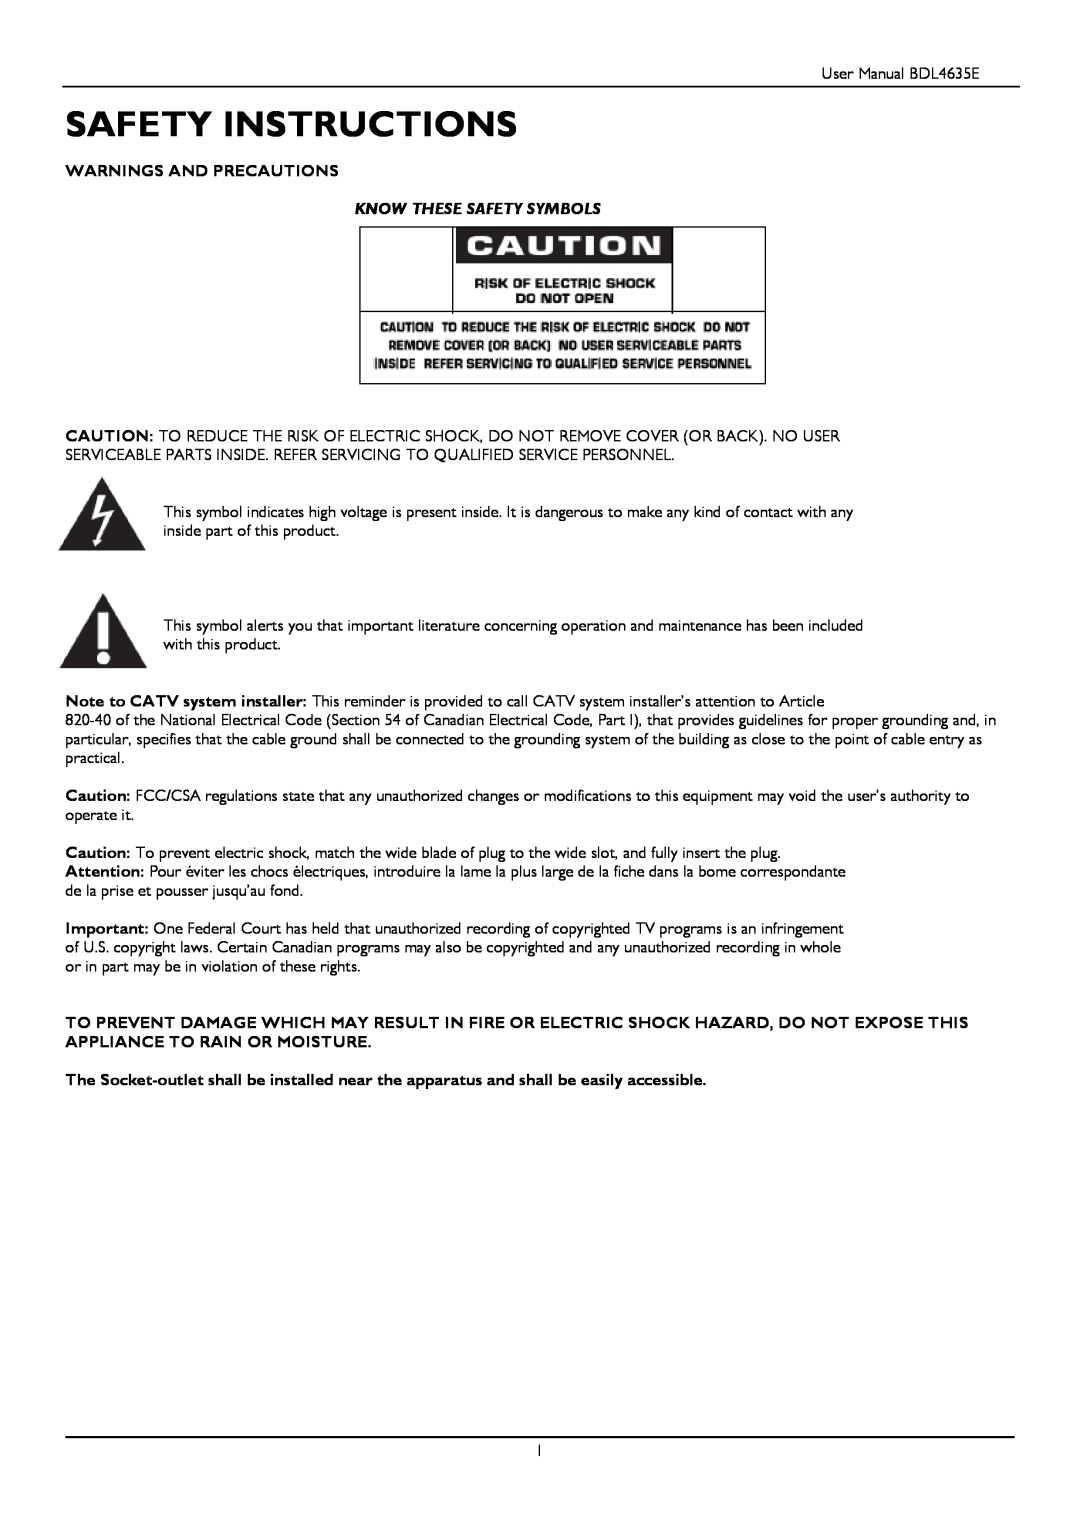 Philips BDL4635E/00 user manual Safety Instructions, Warnings And Precautions, Know These Safety Symbols 